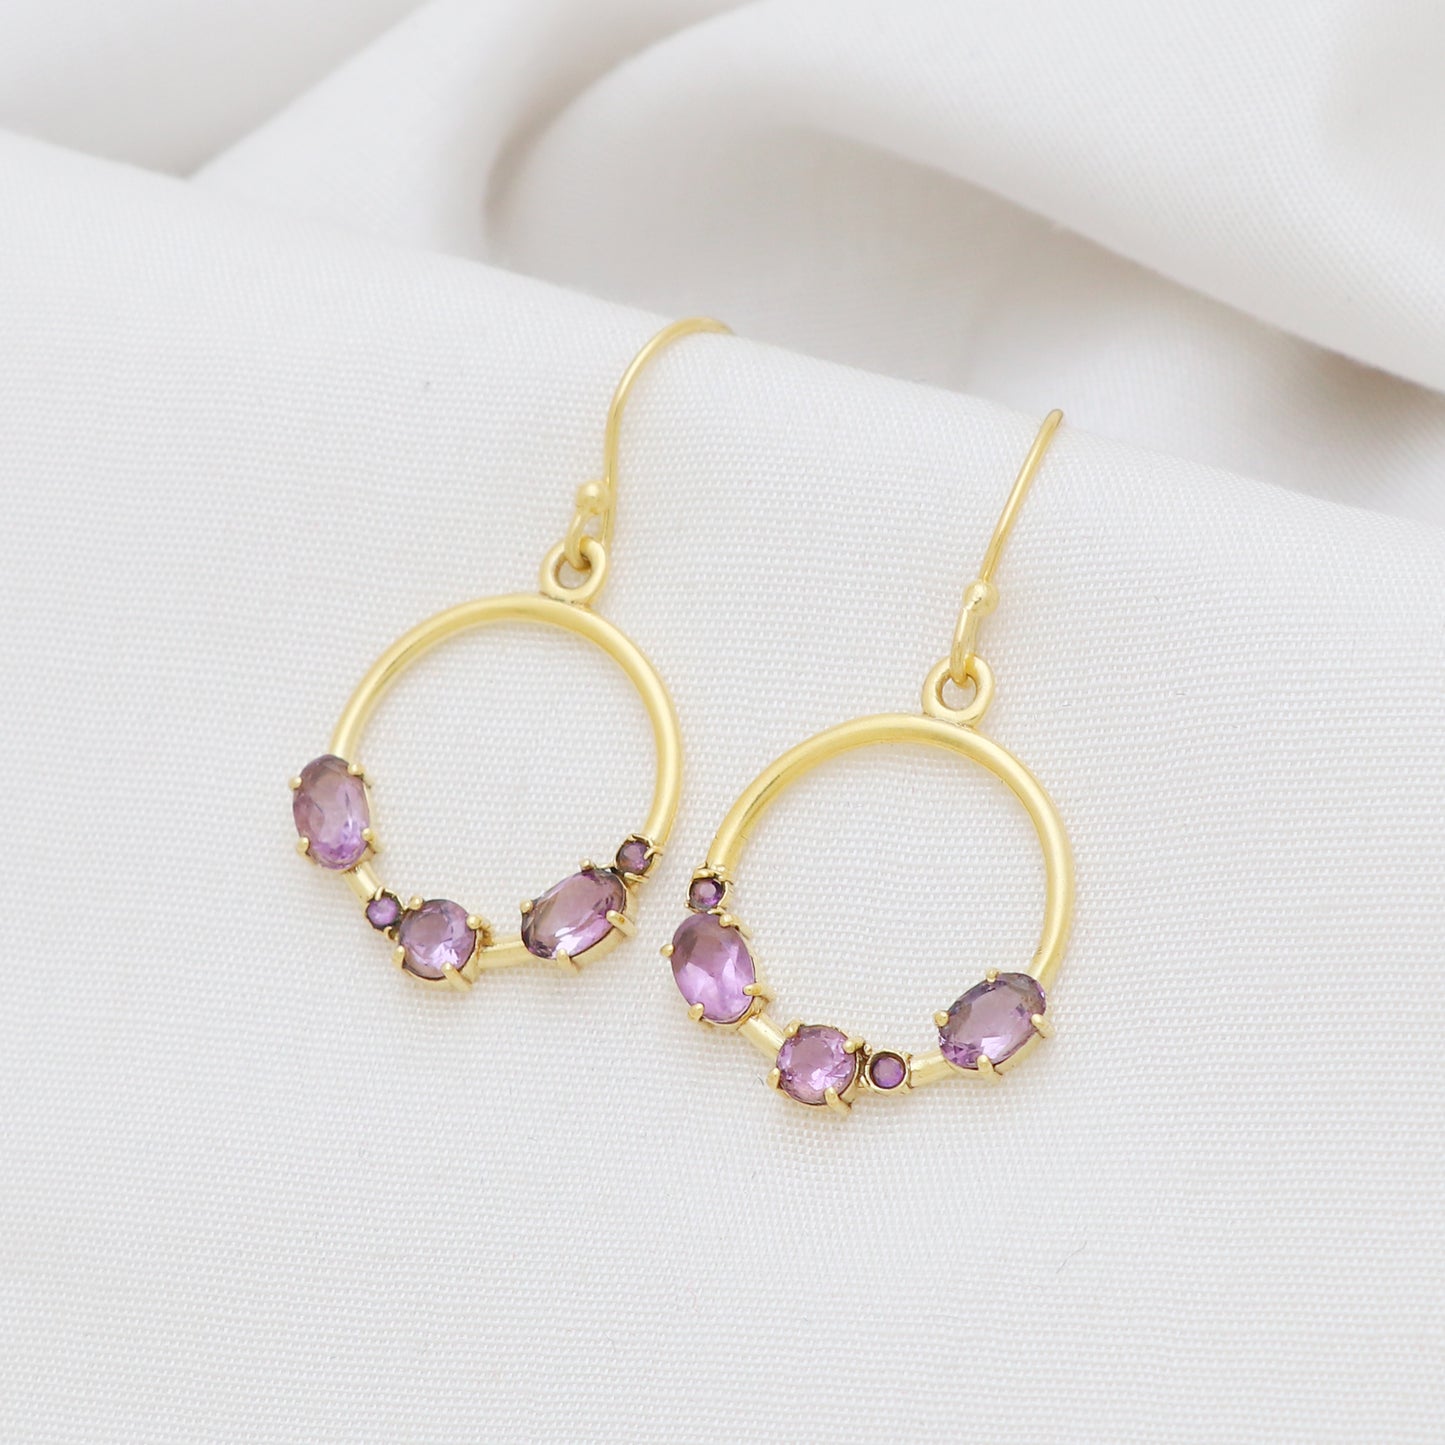 Amethyst gemstone earring in gold plated 925 sterling silver